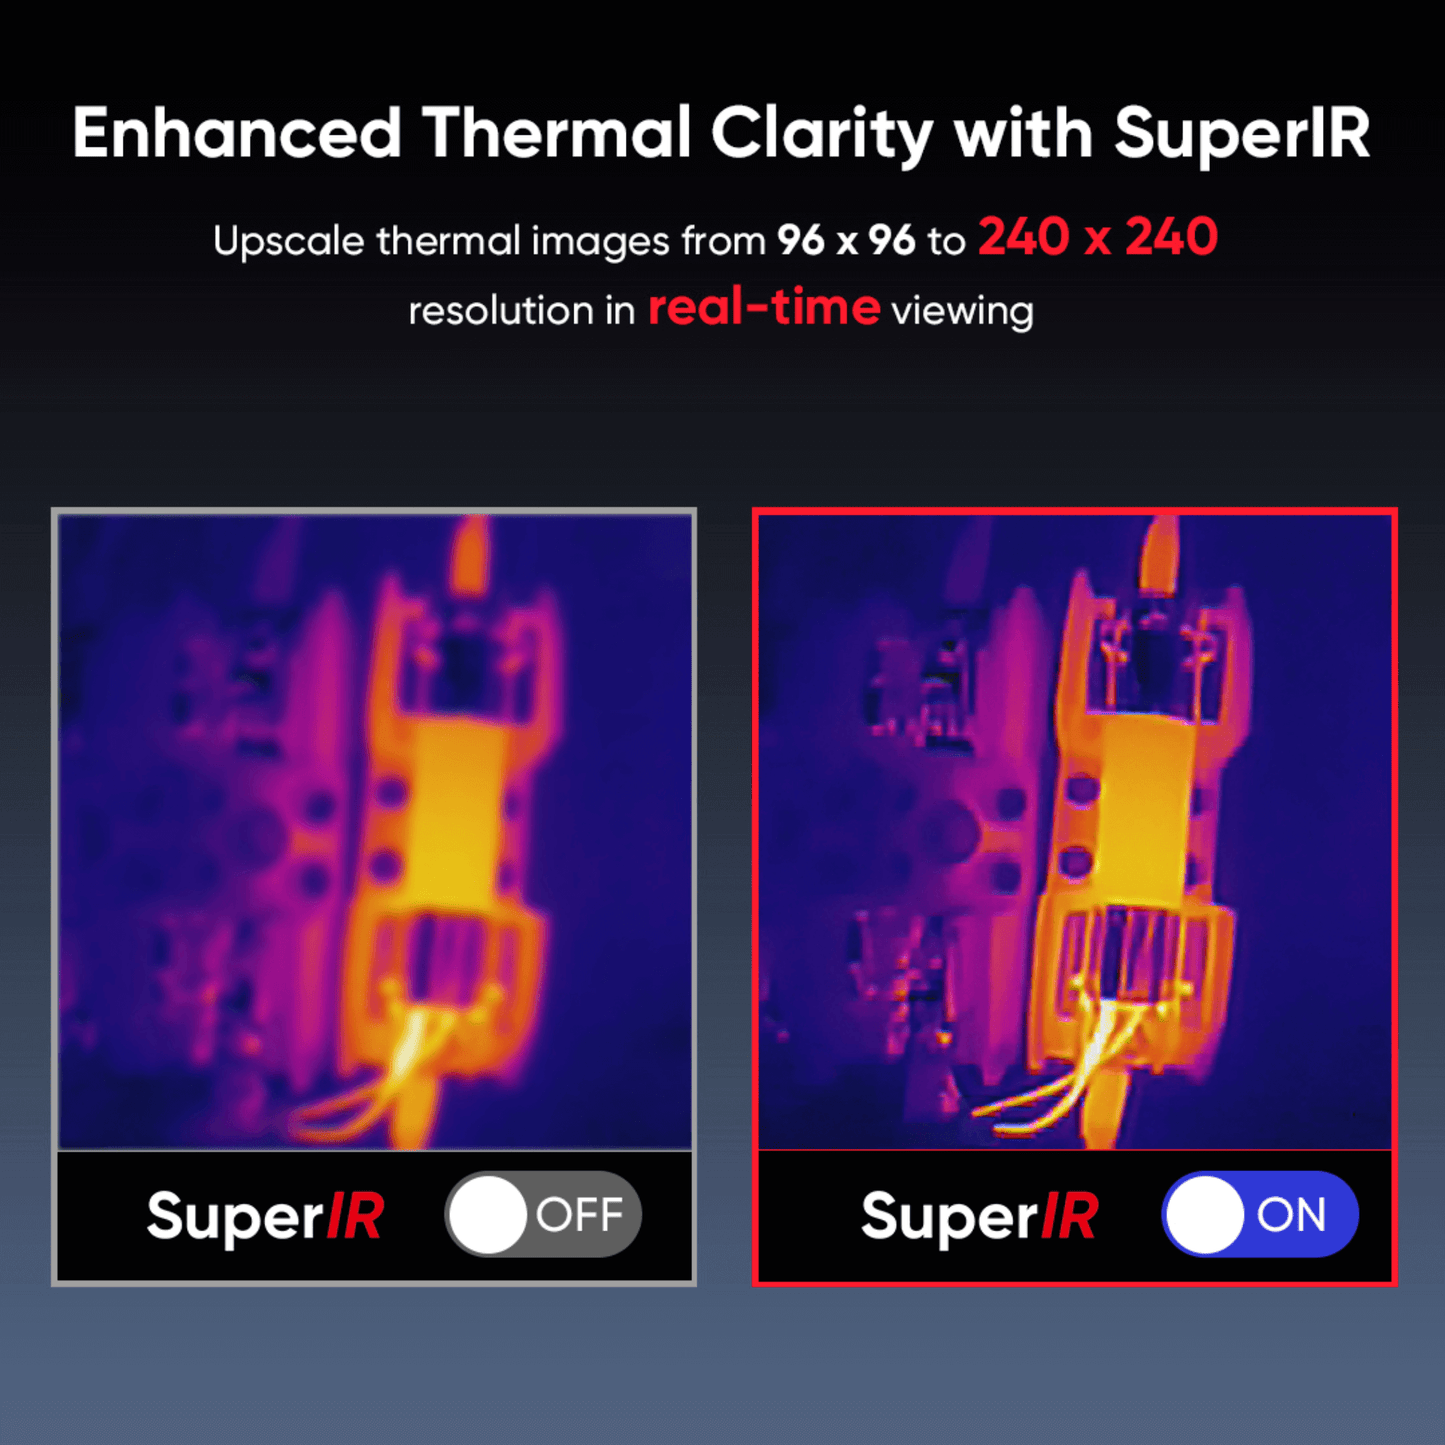 SuperIR enhanced thermal clarity from the Bi-Spectrum HikMicro Eco-V Handheld Thermal Imager 